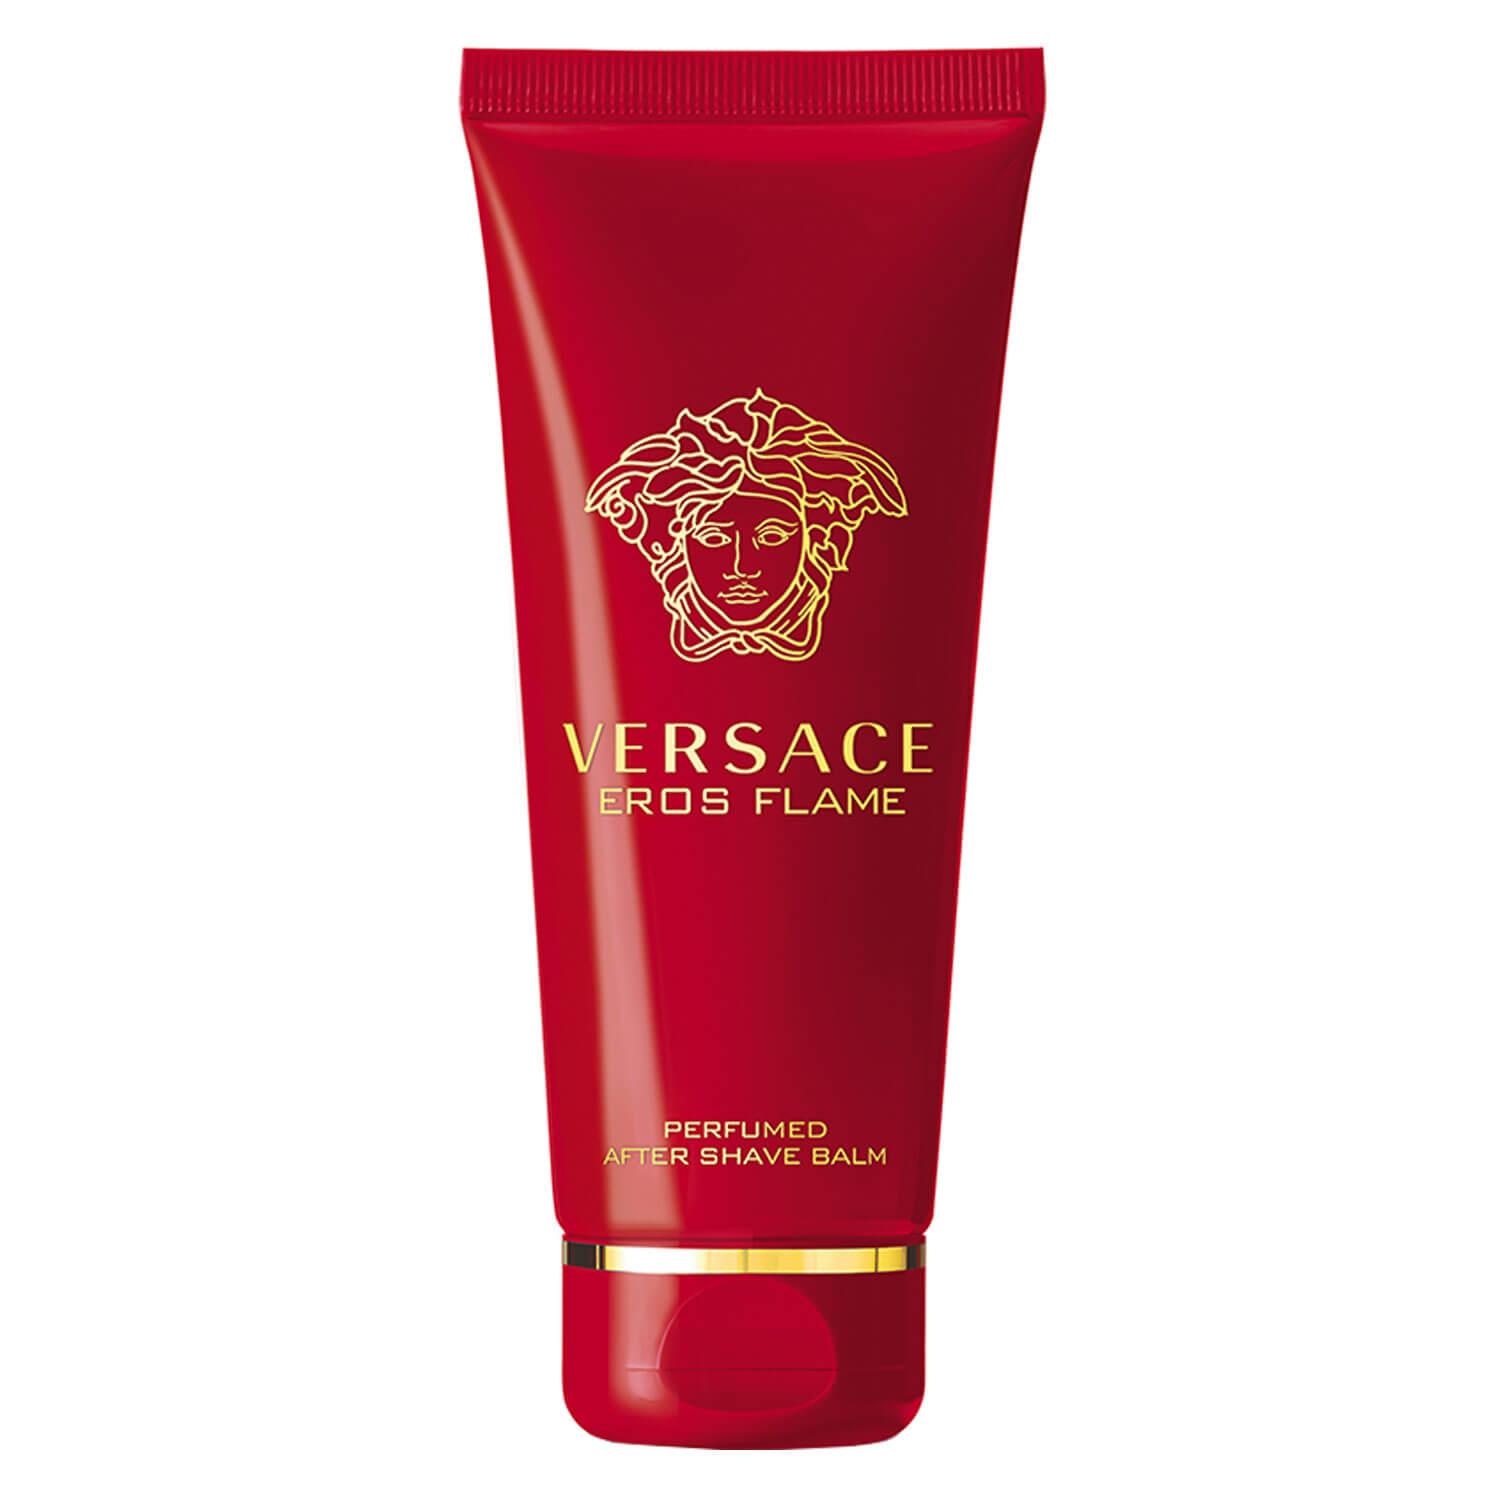 Versace Eros - Flame After Shave Balm